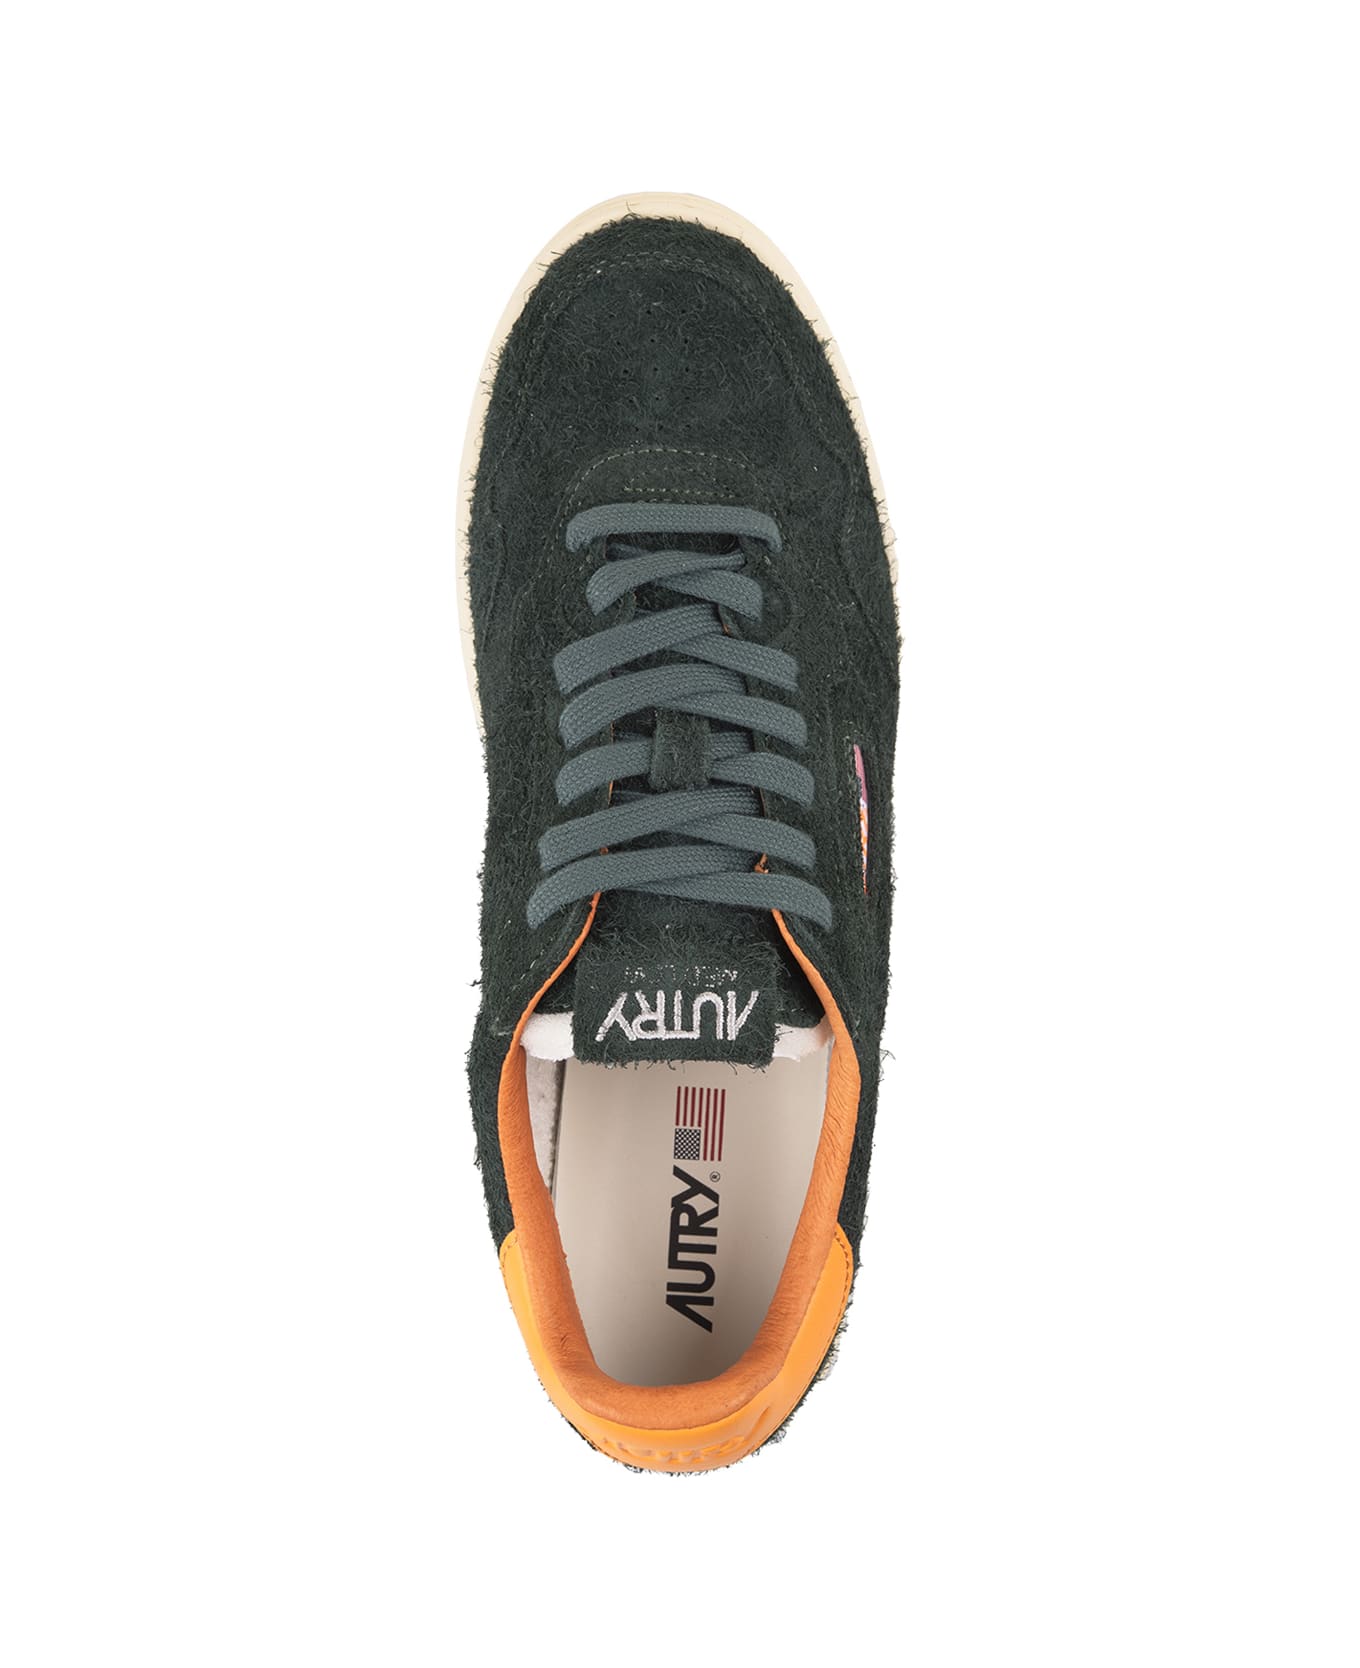 Autry Medalist Flat Sneakers In Green And Glory Suede - Green スニーカー